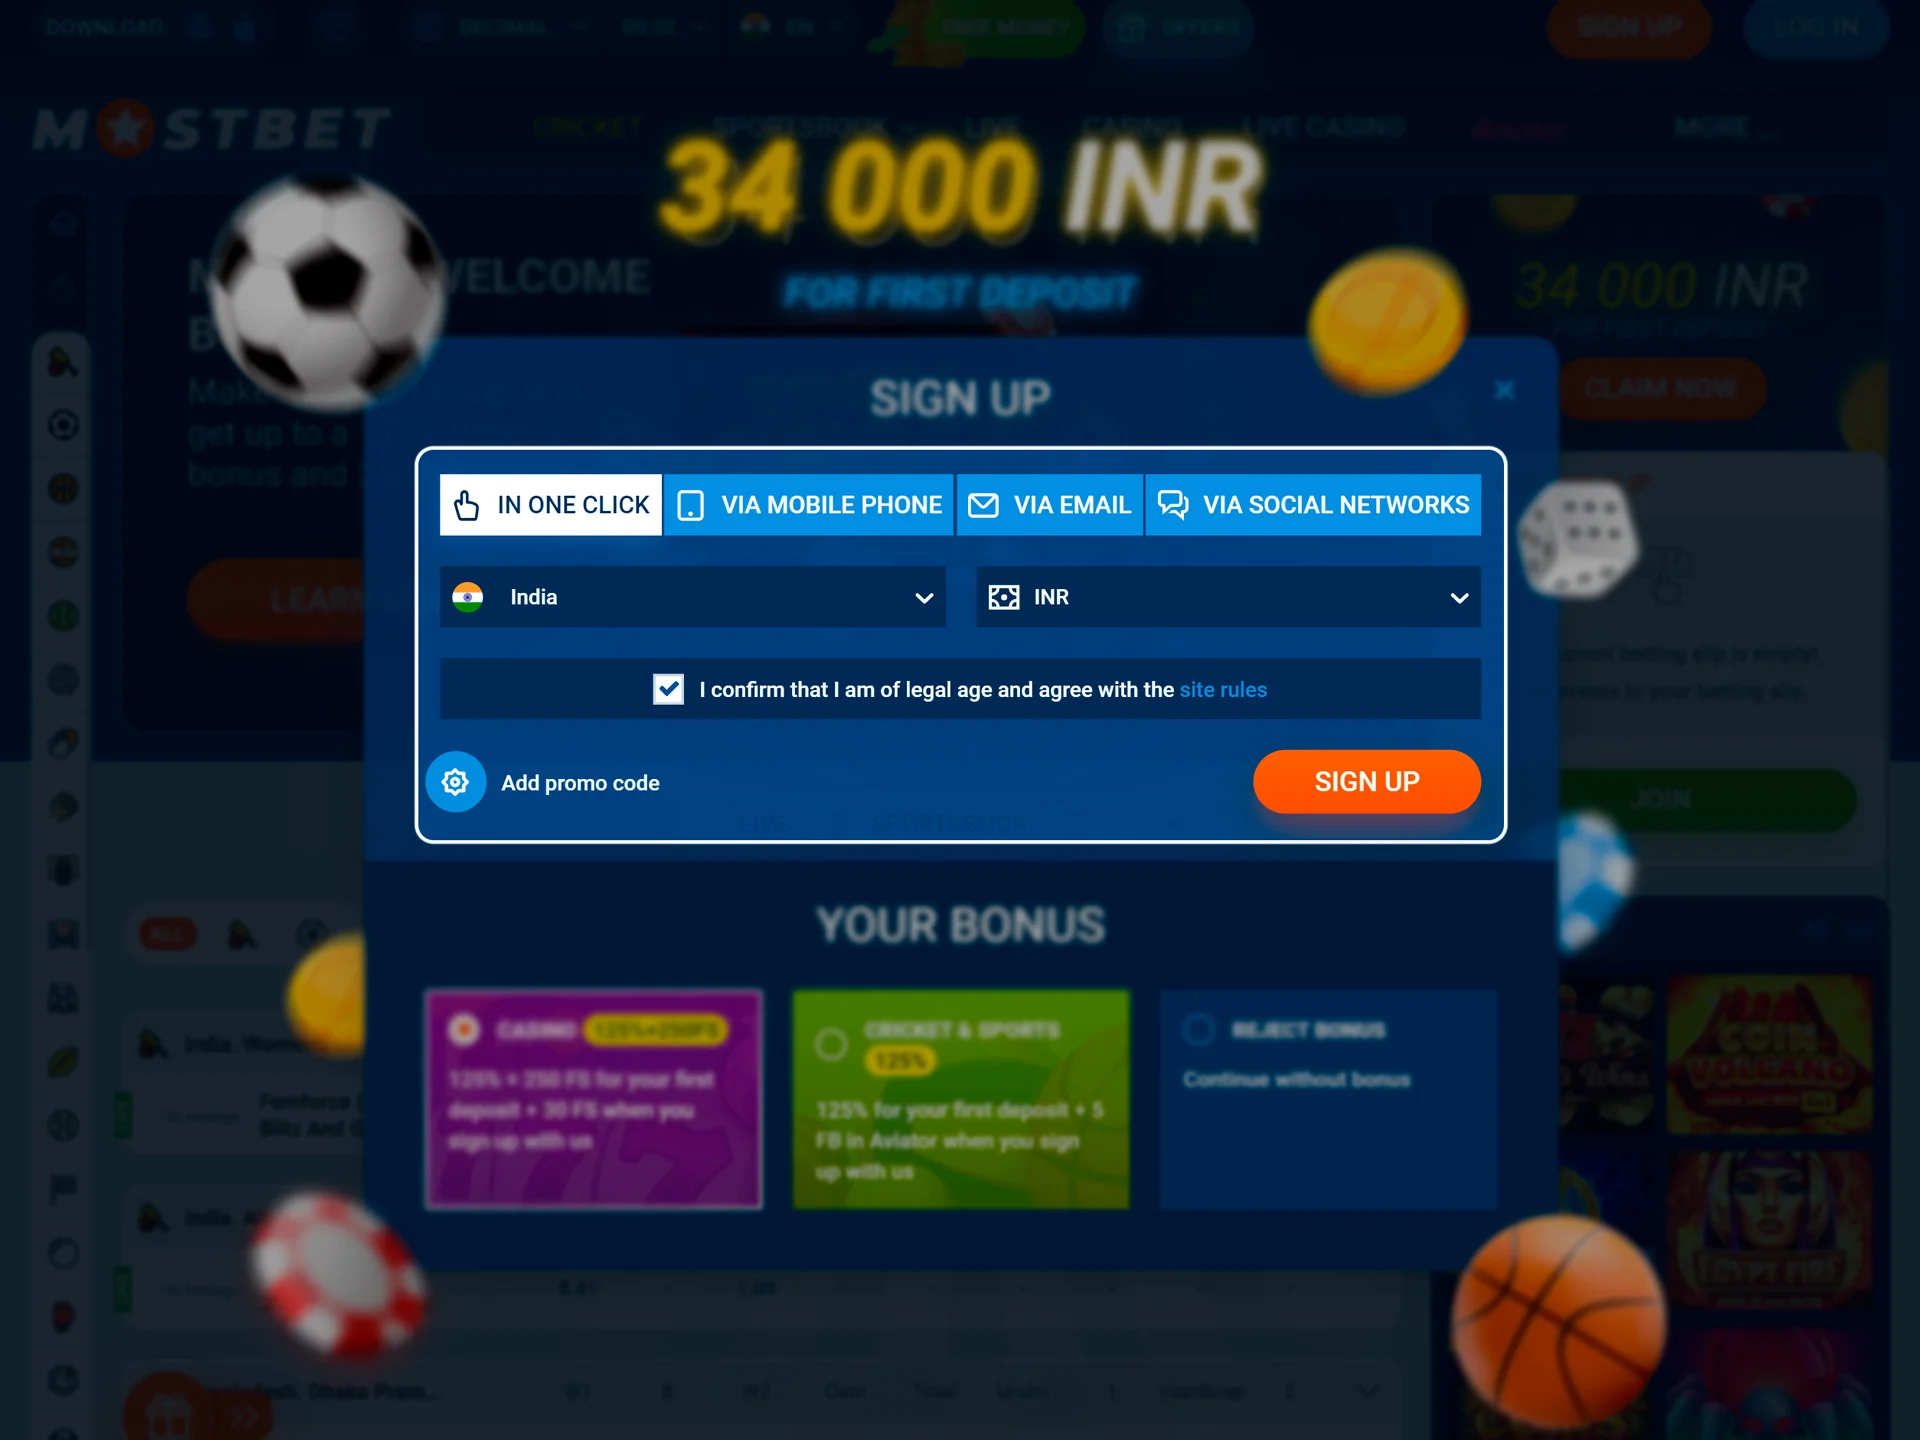 Create an account on the official MostBet website.